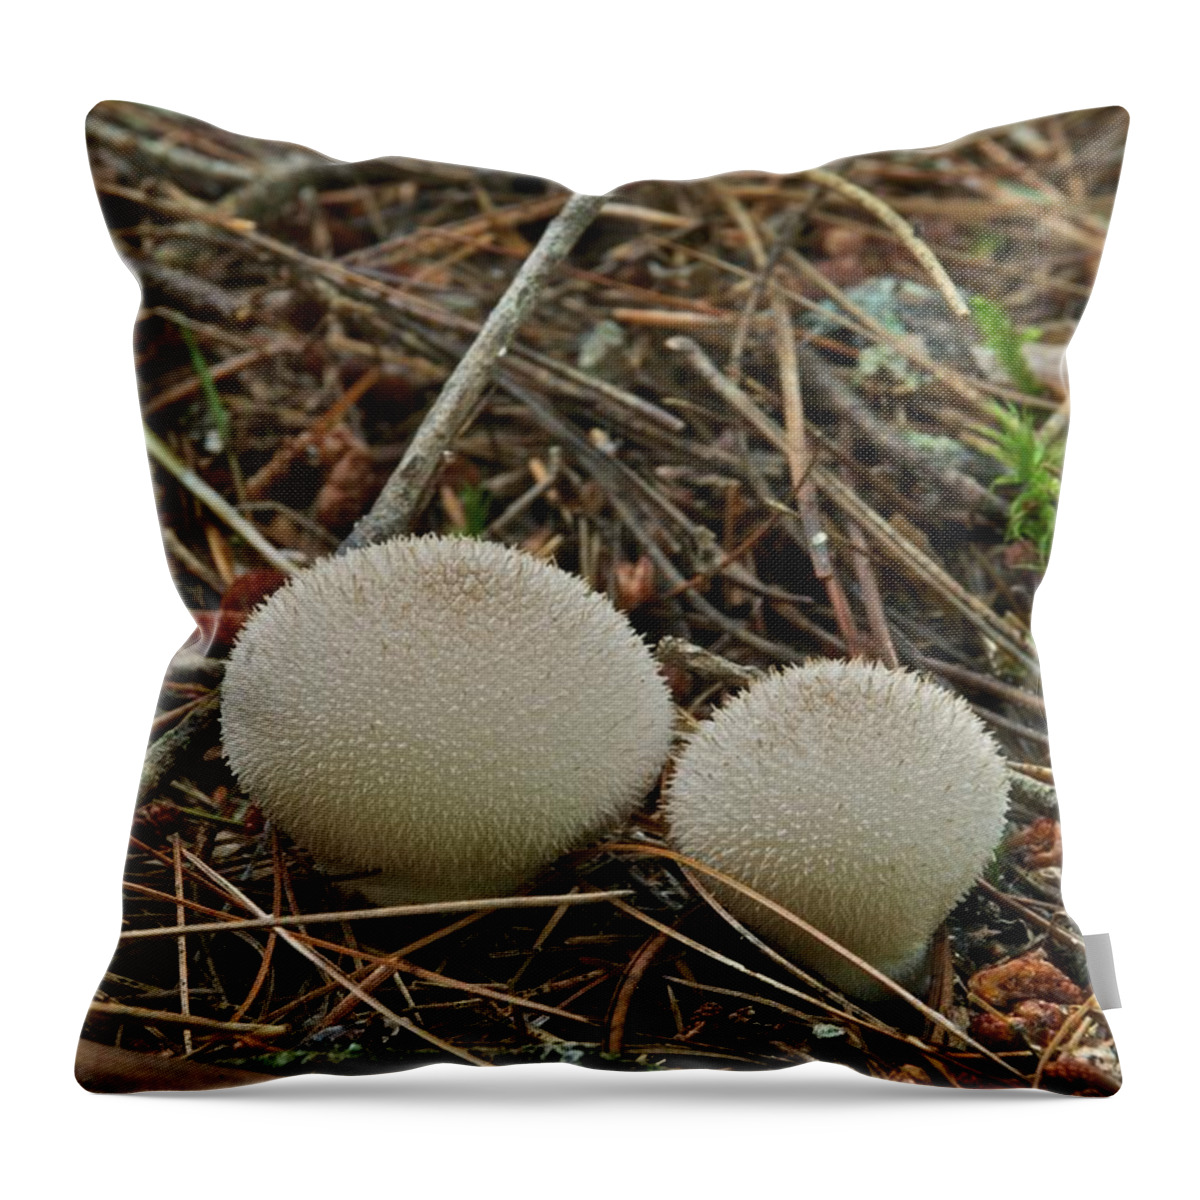 Puff Ball Throw Pillow featuring the photograph Spiny Puff Balls by Michael Peychich